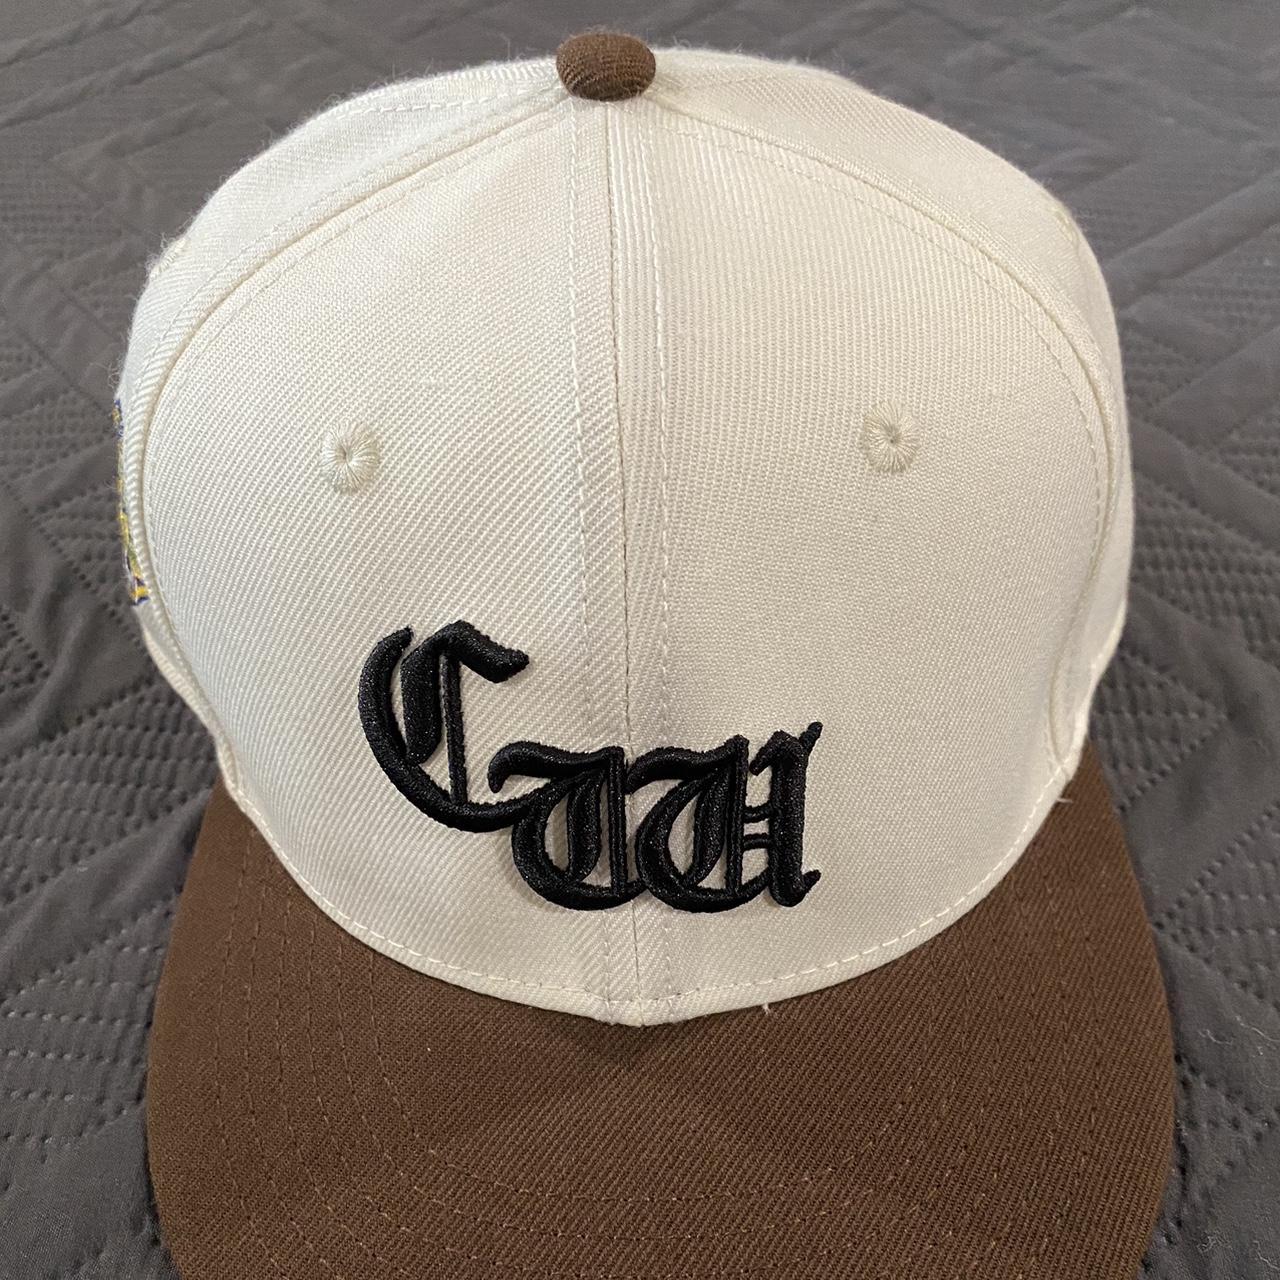 Cold World fitted cap size 7 1/2 #ColdWorld... - Depop